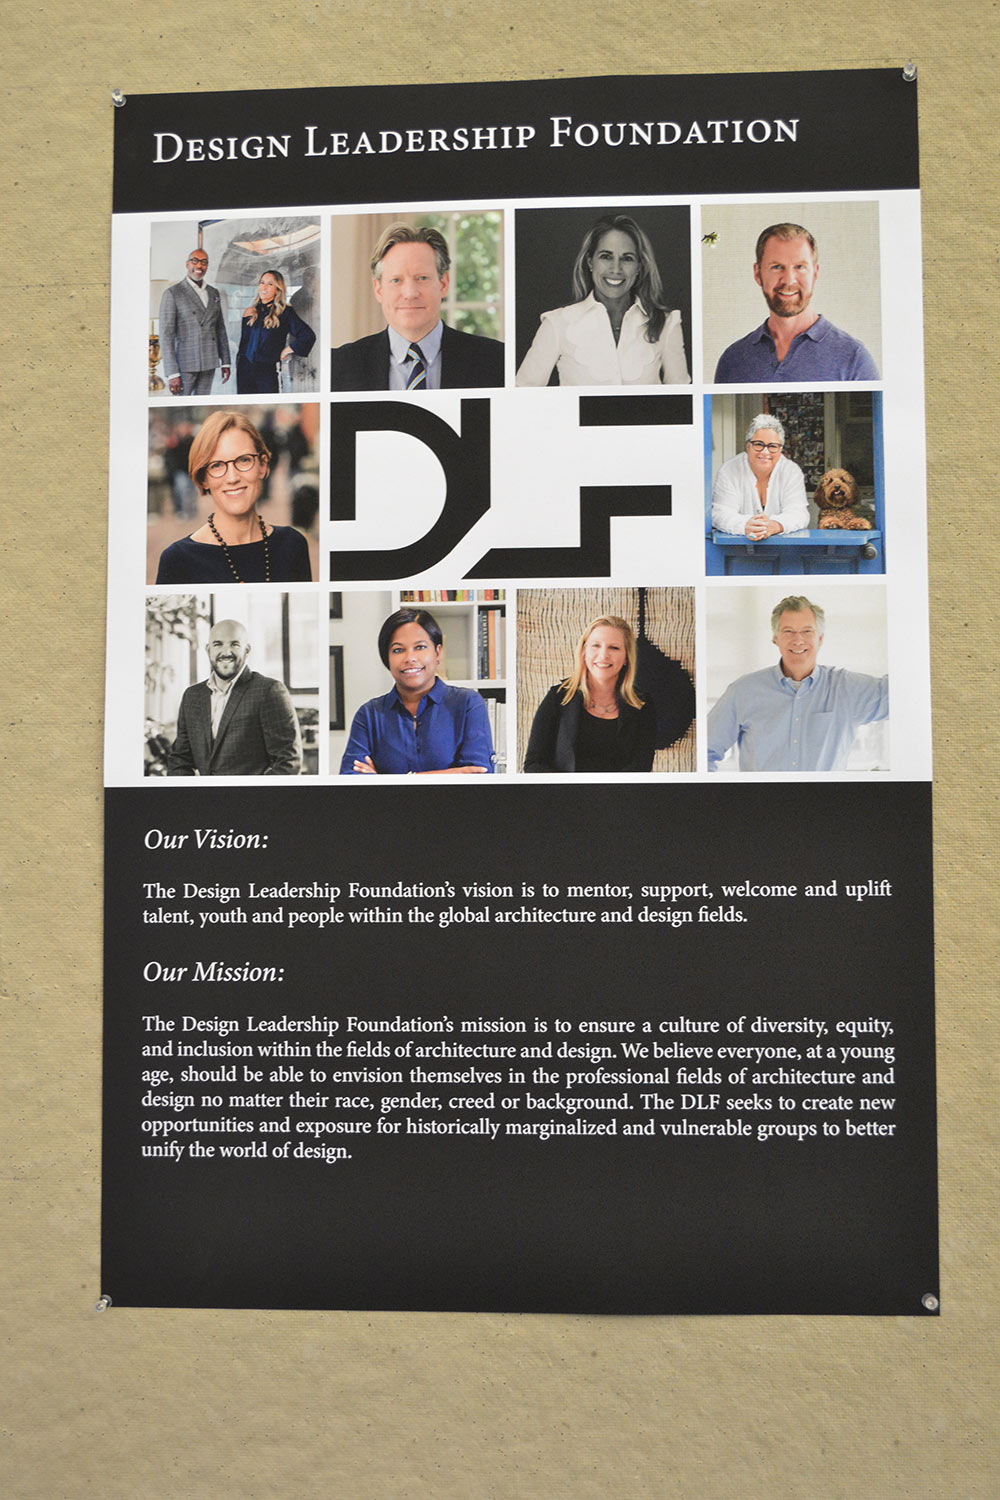 Poster of the Design Leadership Foundation with images of the leaders.